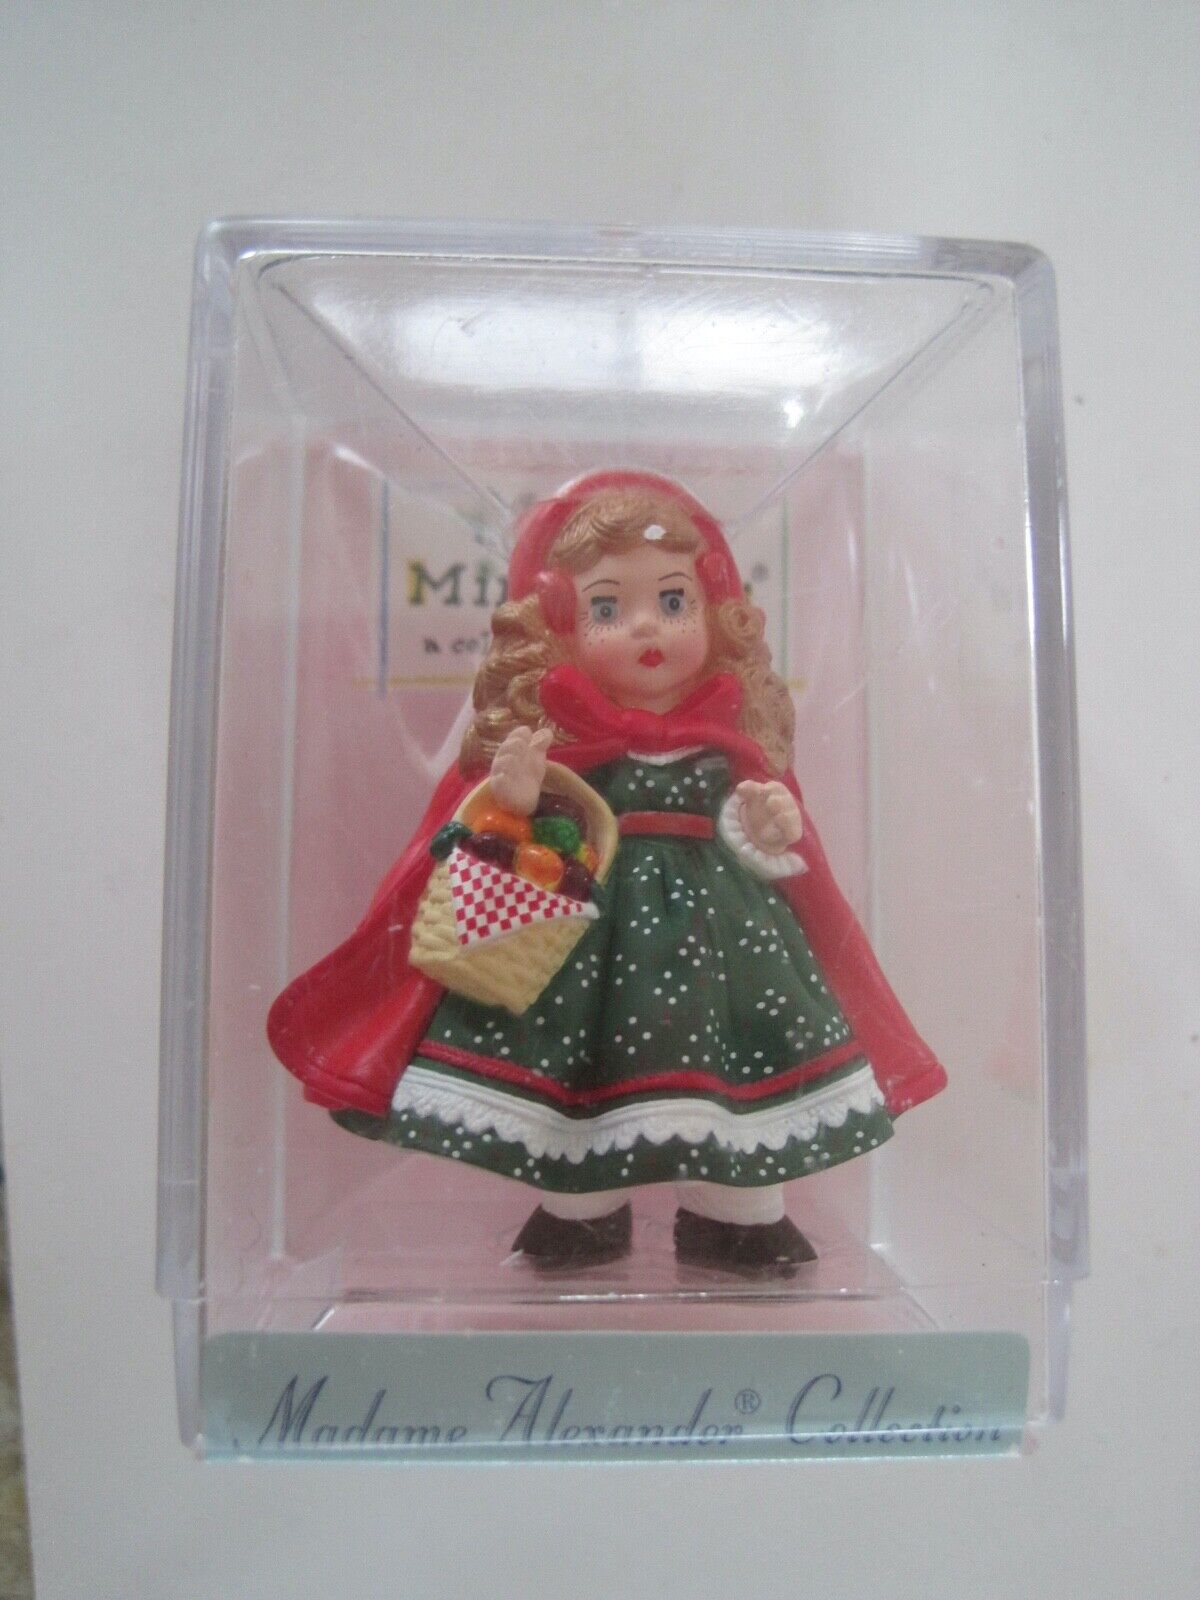 Madame Alexander Collection Red Riding Hood Miniature 1991 Vintage